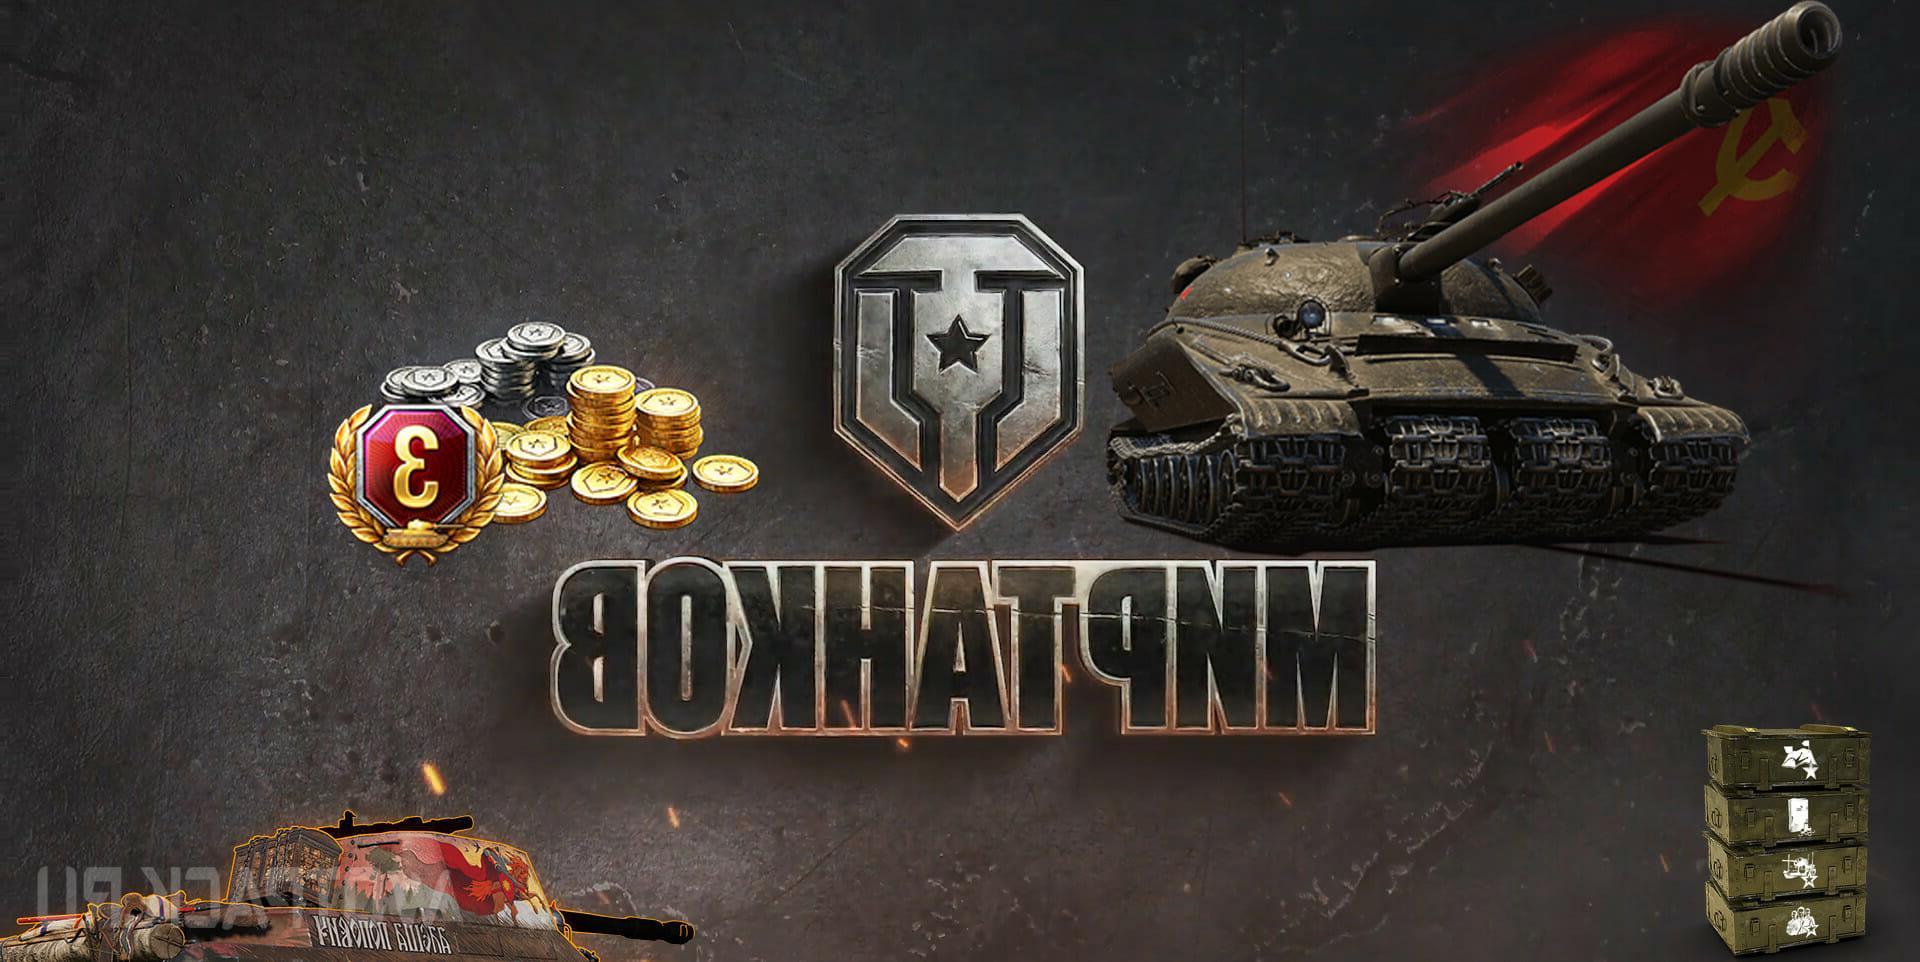 World of Tanks, a new name for the widely famous game World of Tanks, appeared as a result of its rebranding after the breakup from Wargaming. Promics are also different for the two versions of this game. However, in this article, we regularly add a valid bonus code for World of Tanks. We constantly track and execute all of this.